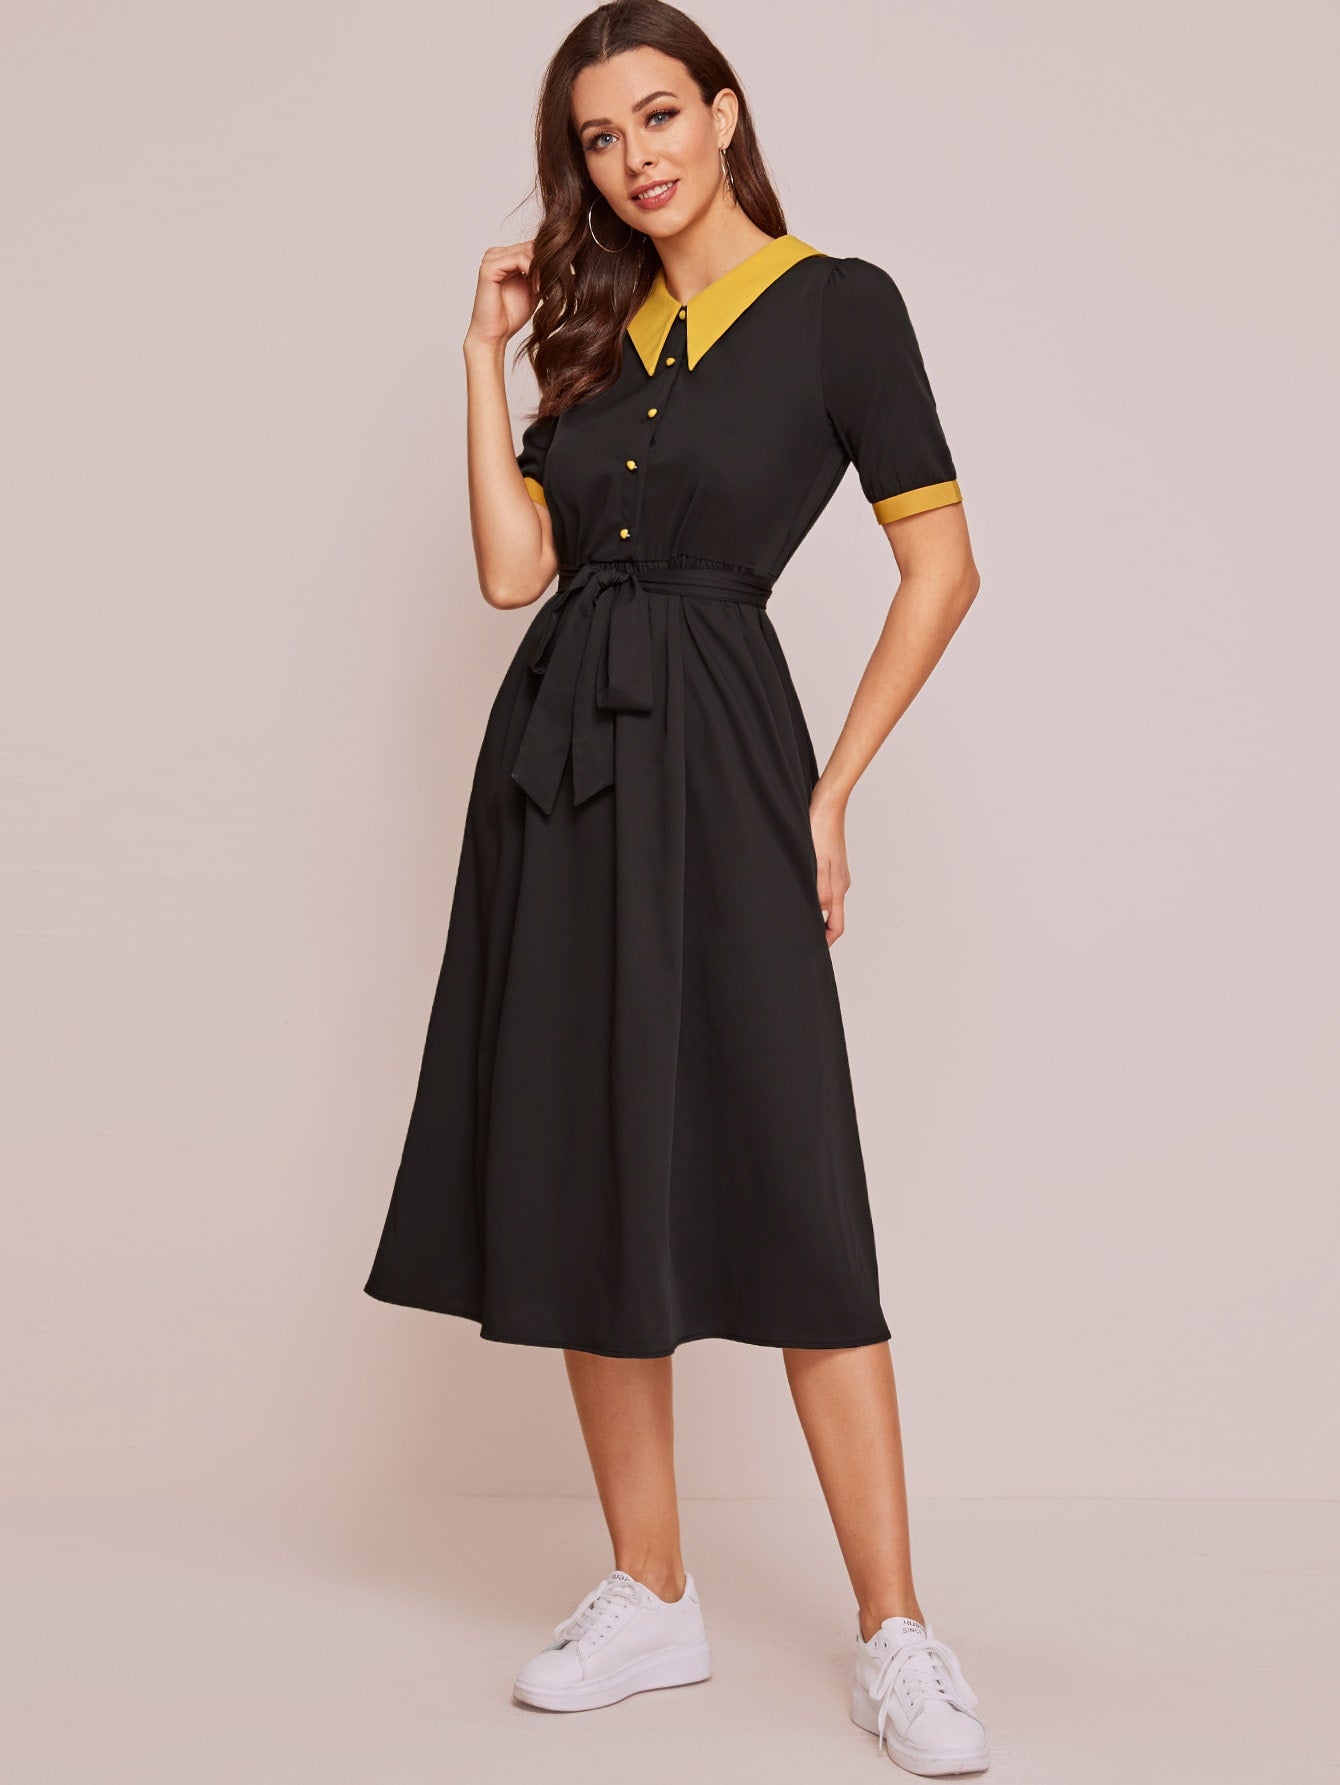 Contrast Collar Button Front Belted Dress